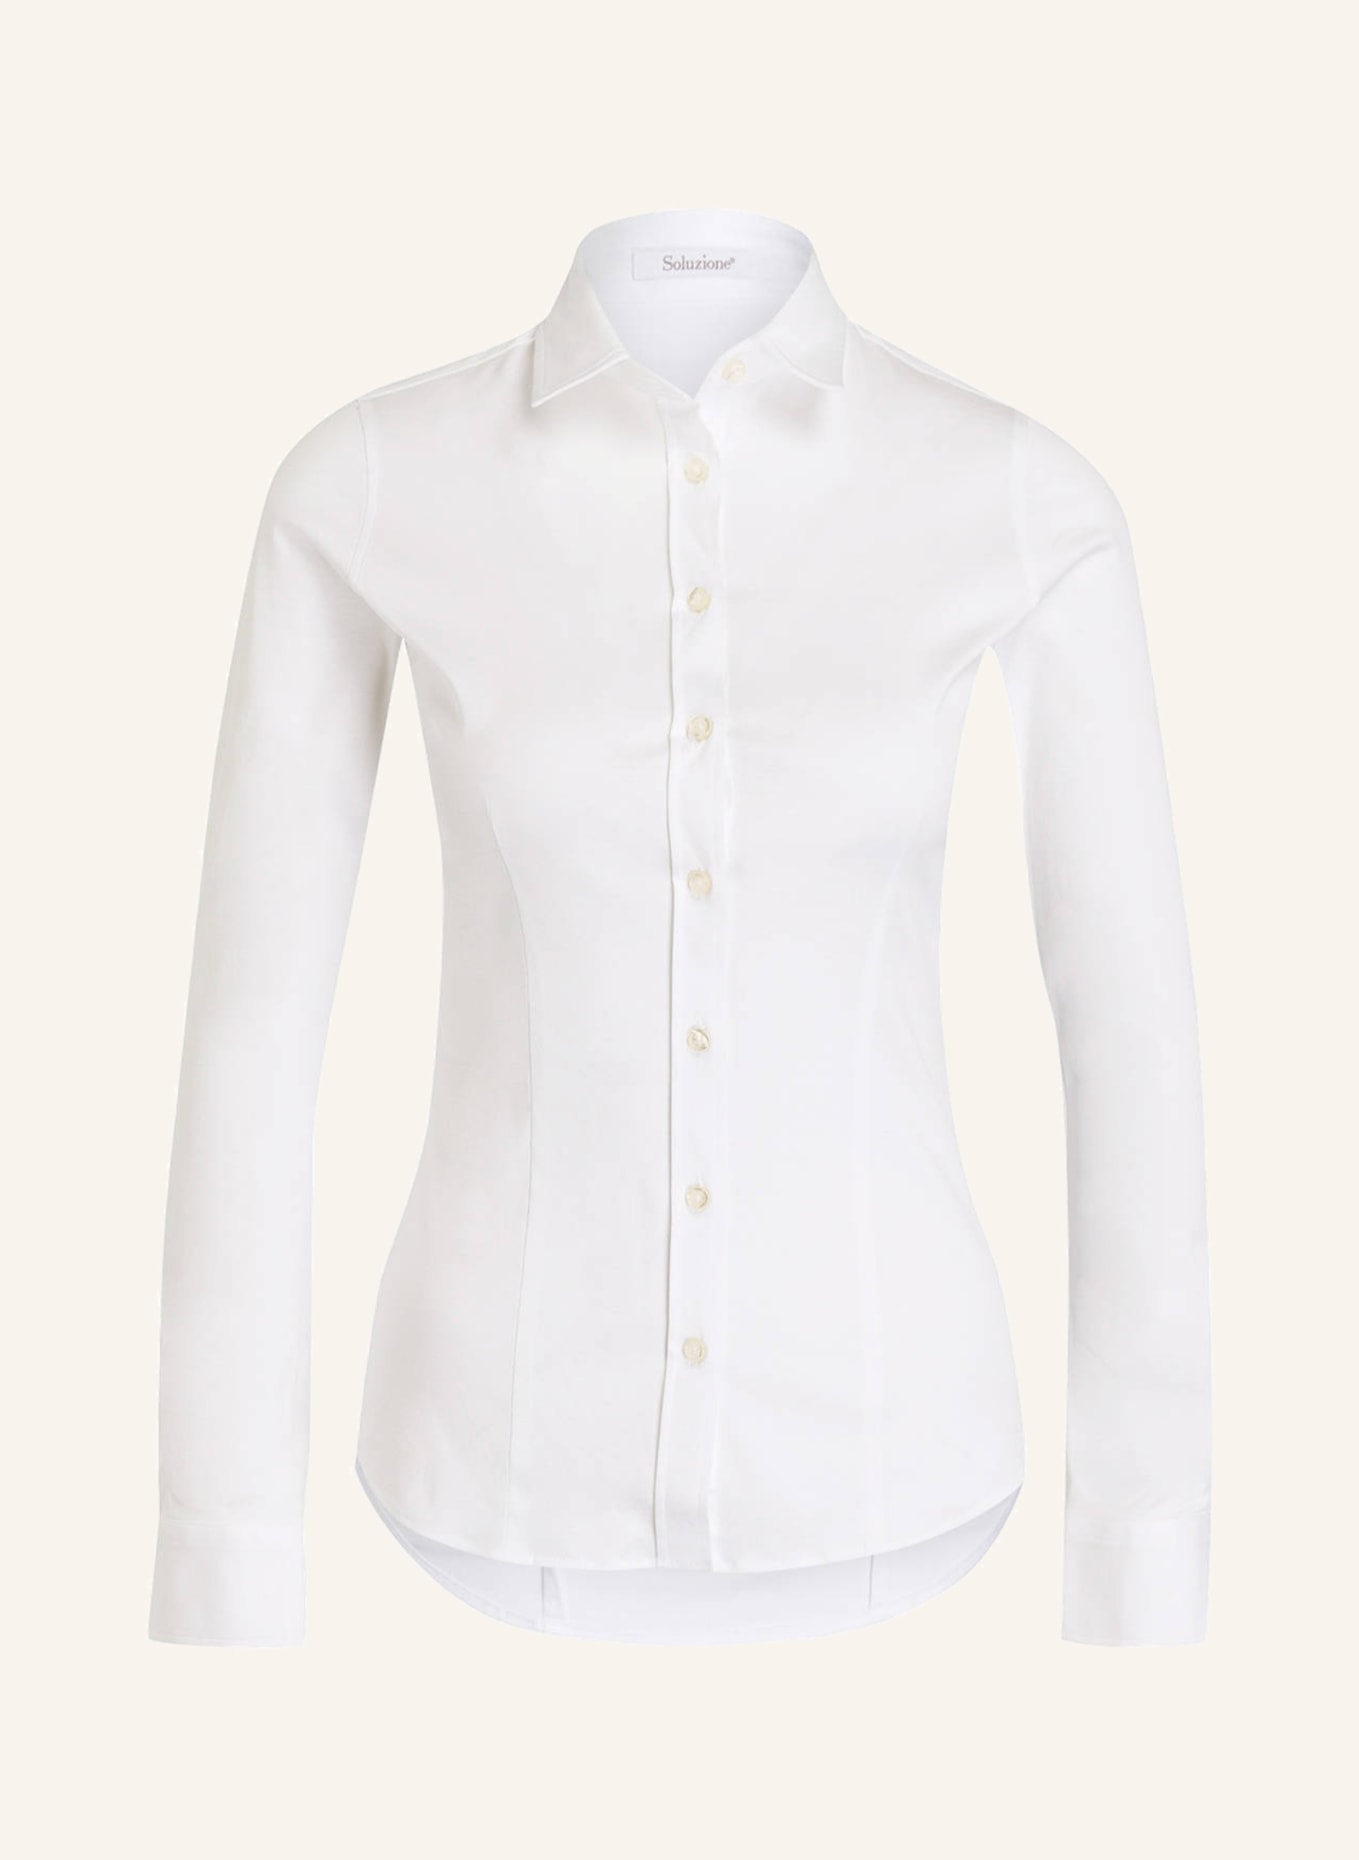 Soluzione Shirt blouse made of jersey, Color: 10 WEISS (Image 1)